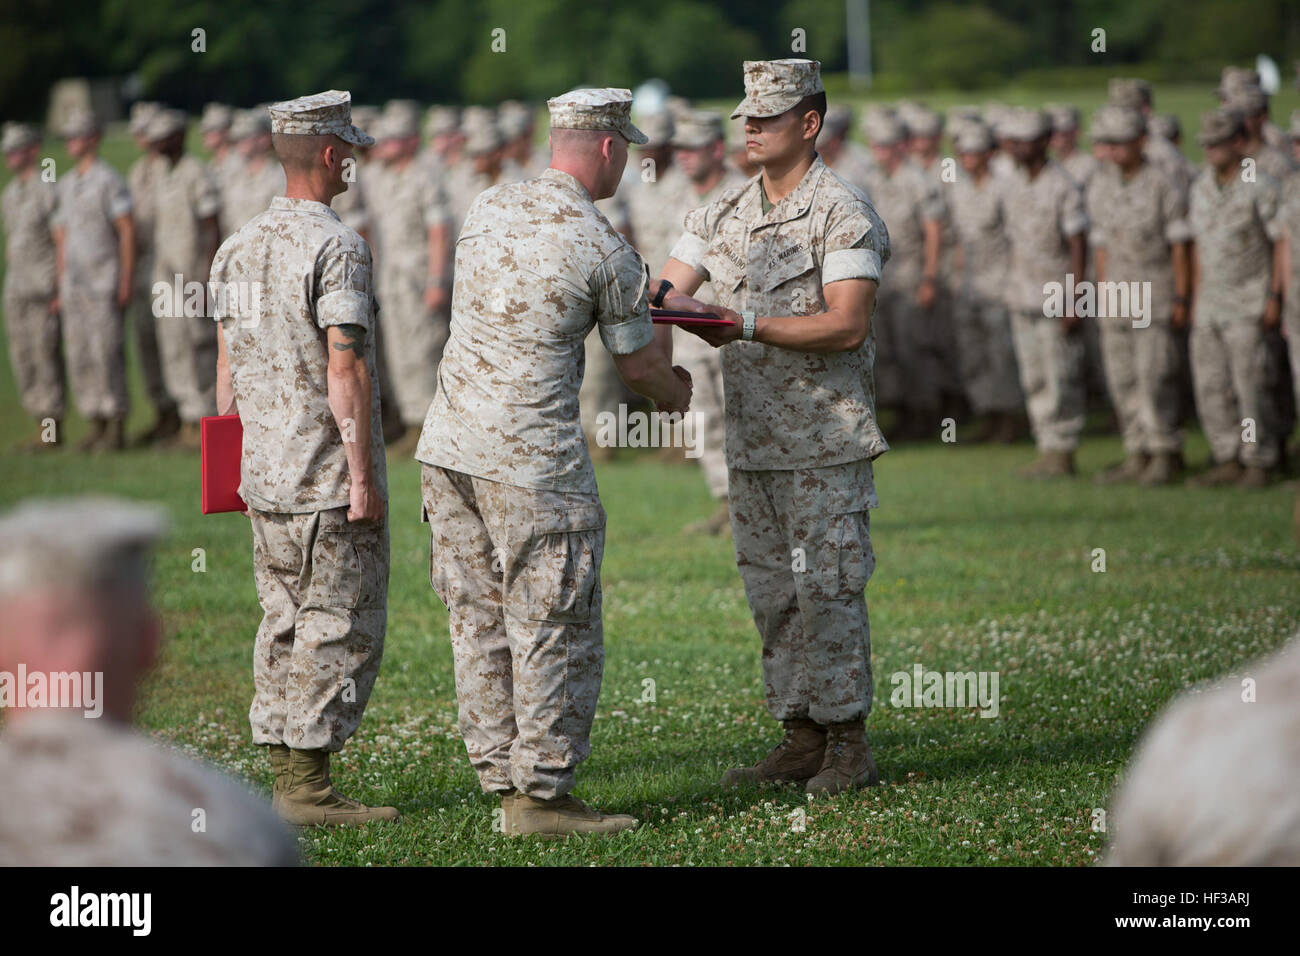 U.S. Marine Corps Lance Cpl. Roman A. Alvarado, right, an entry-level Marine with Alpha Company (Alpha Co.) Infantry Training Battalion, School of Infantry-East receives an award from Capt. Mikelis J. Visgauss, Company Commander, Alpha Co., during the Alpha Co. Graduation Ceremony on Camp Geiger, N.C., May 21, 2015. The Marines of Alpha Co. completed the nine week course as part of their last stage of initial military training and will be sent to units in the operating forces. (U.S. Marine Corps photo by Lance Cpl. Andrew Kuppers, SOI-East Combat Camera/Released) Alpha Company Graduation from  Stock Photo